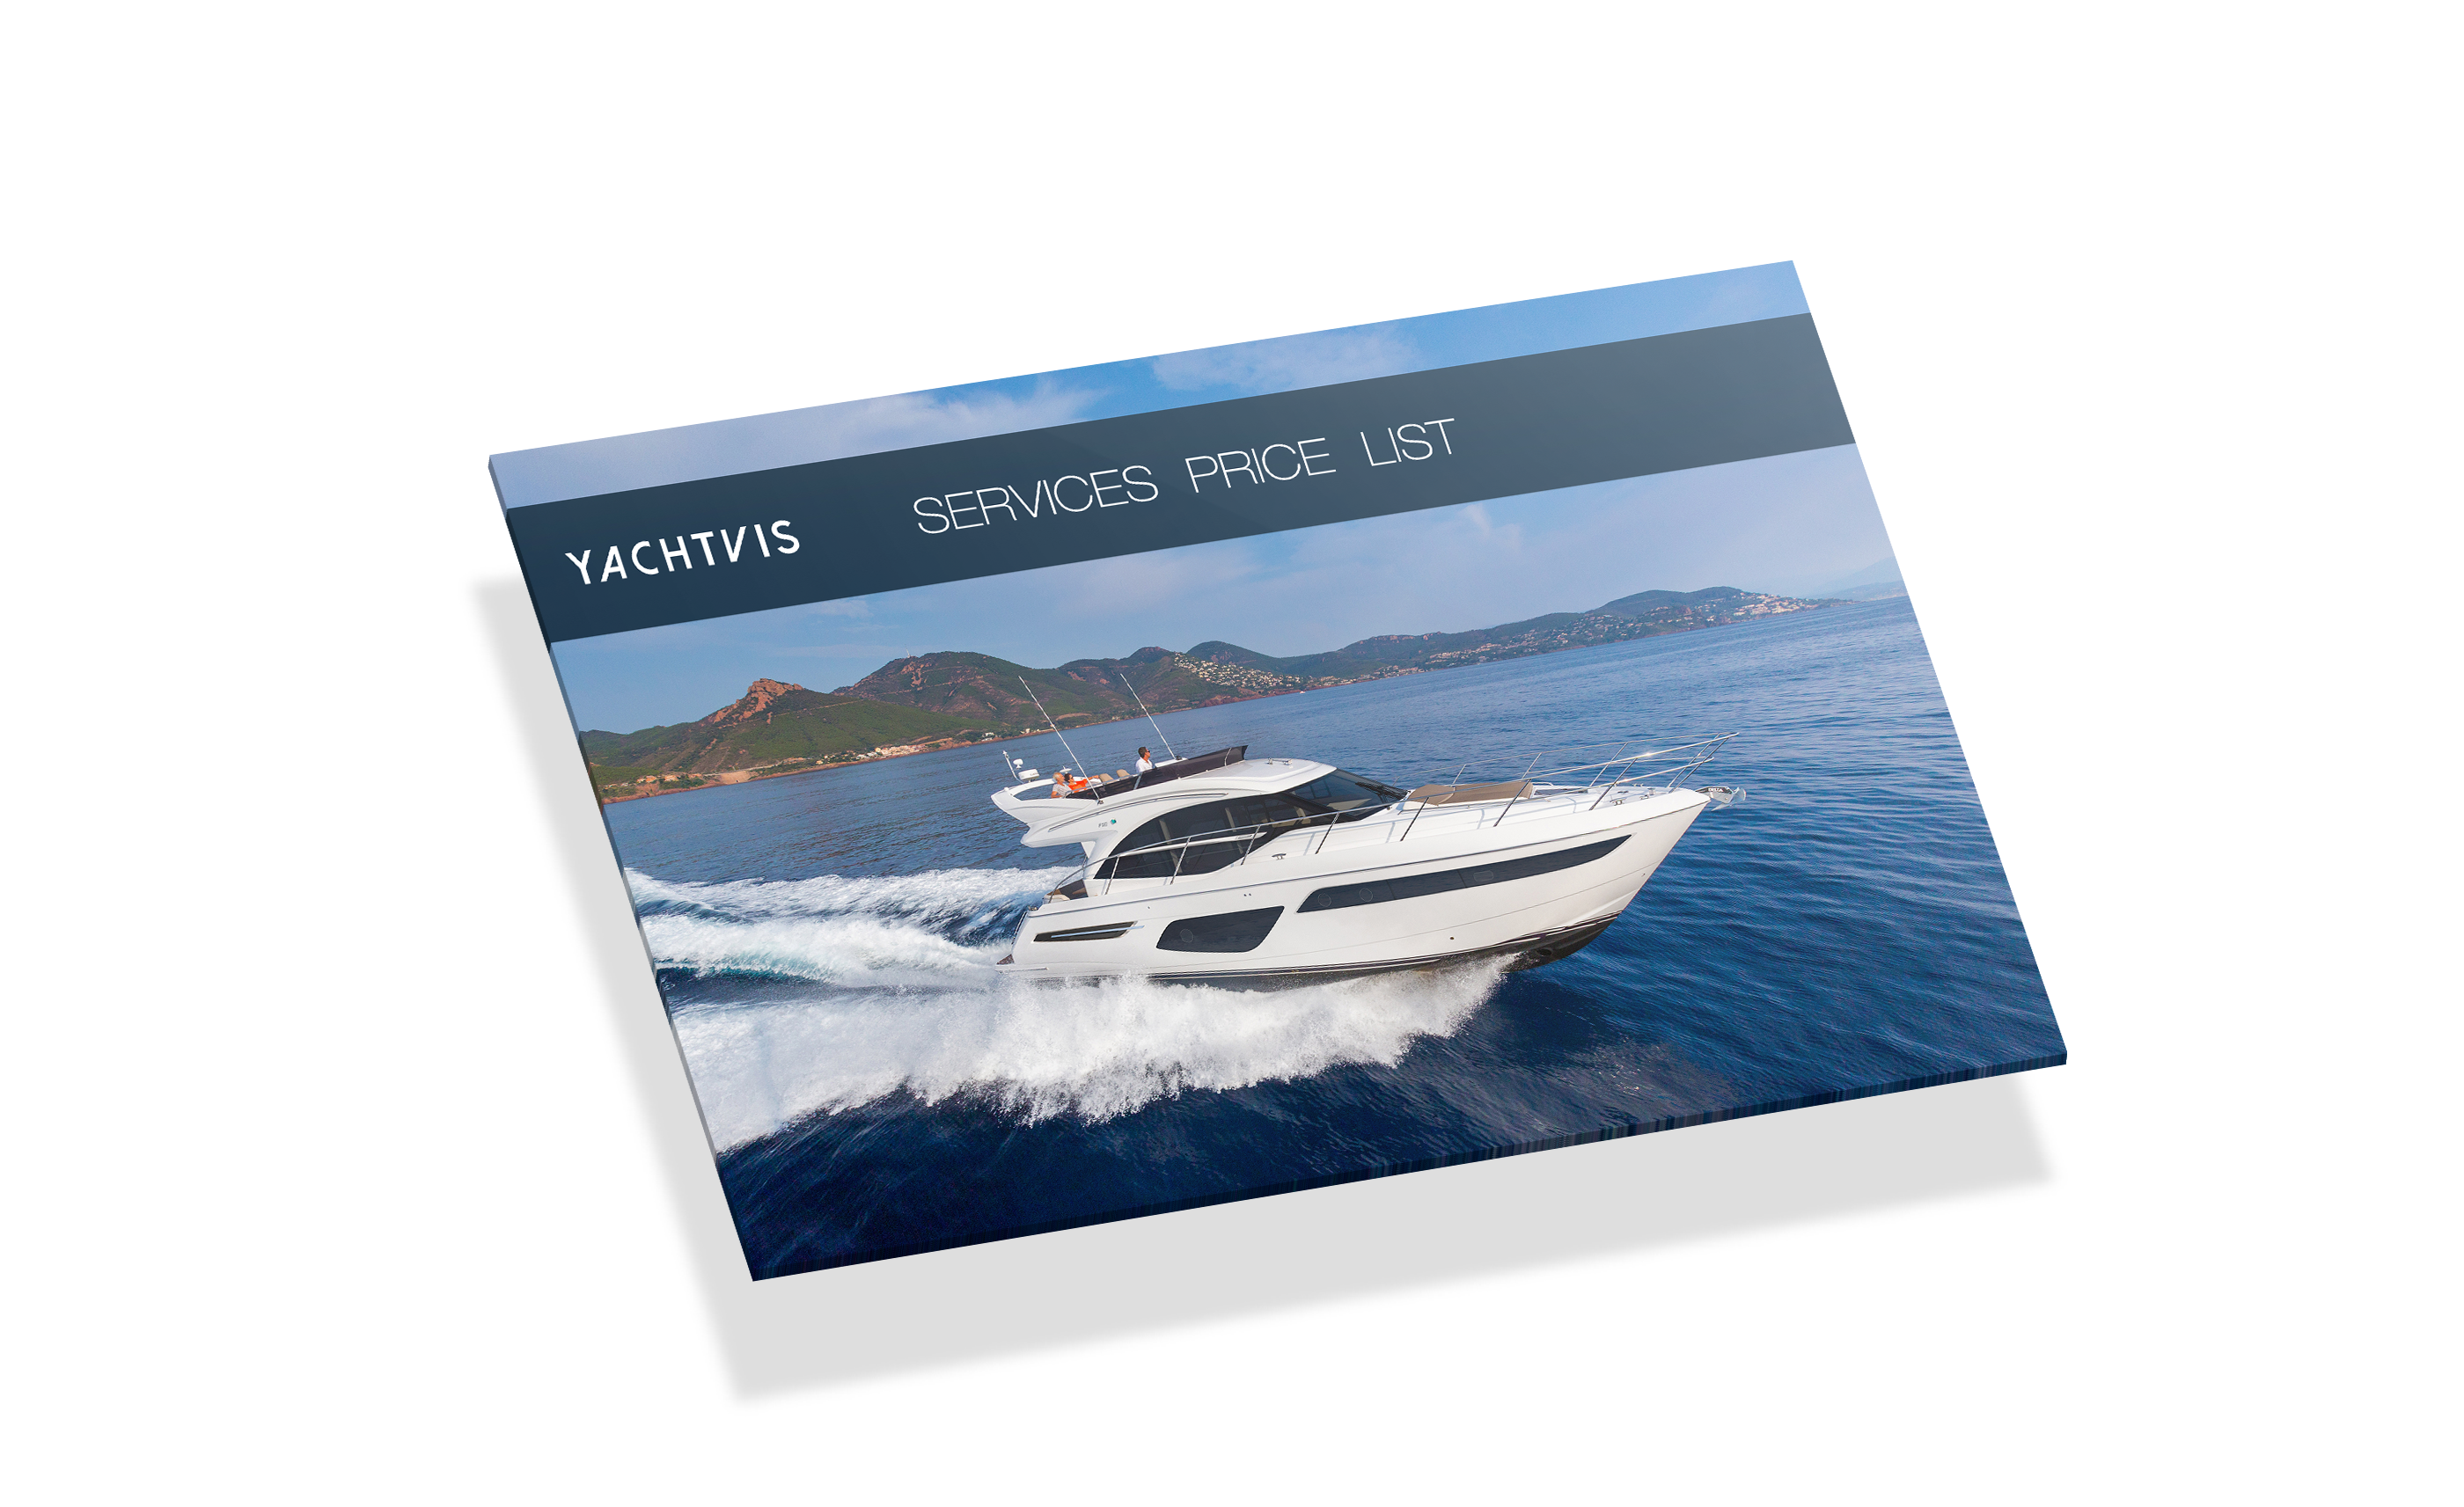 Yacht Rendering Catalogue Services Price list